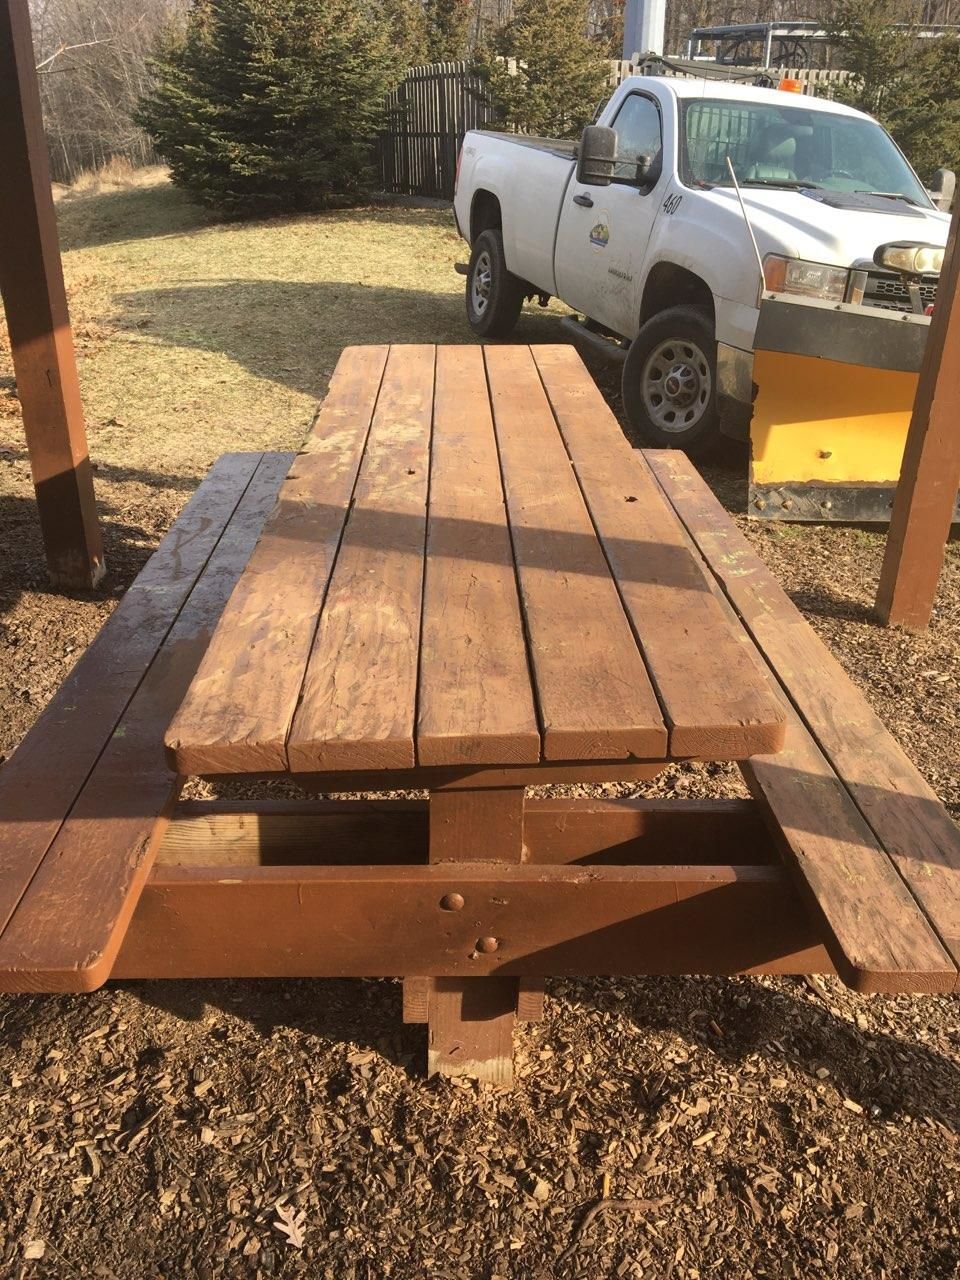 The picnic table at Veterans Memorial Park in Parma was cleaned a day after the Cleveland Jewish News informed police that it had been vandalized with swastikas, obscene images and words, racist epithets and the Confederate flag.  Submitted photo